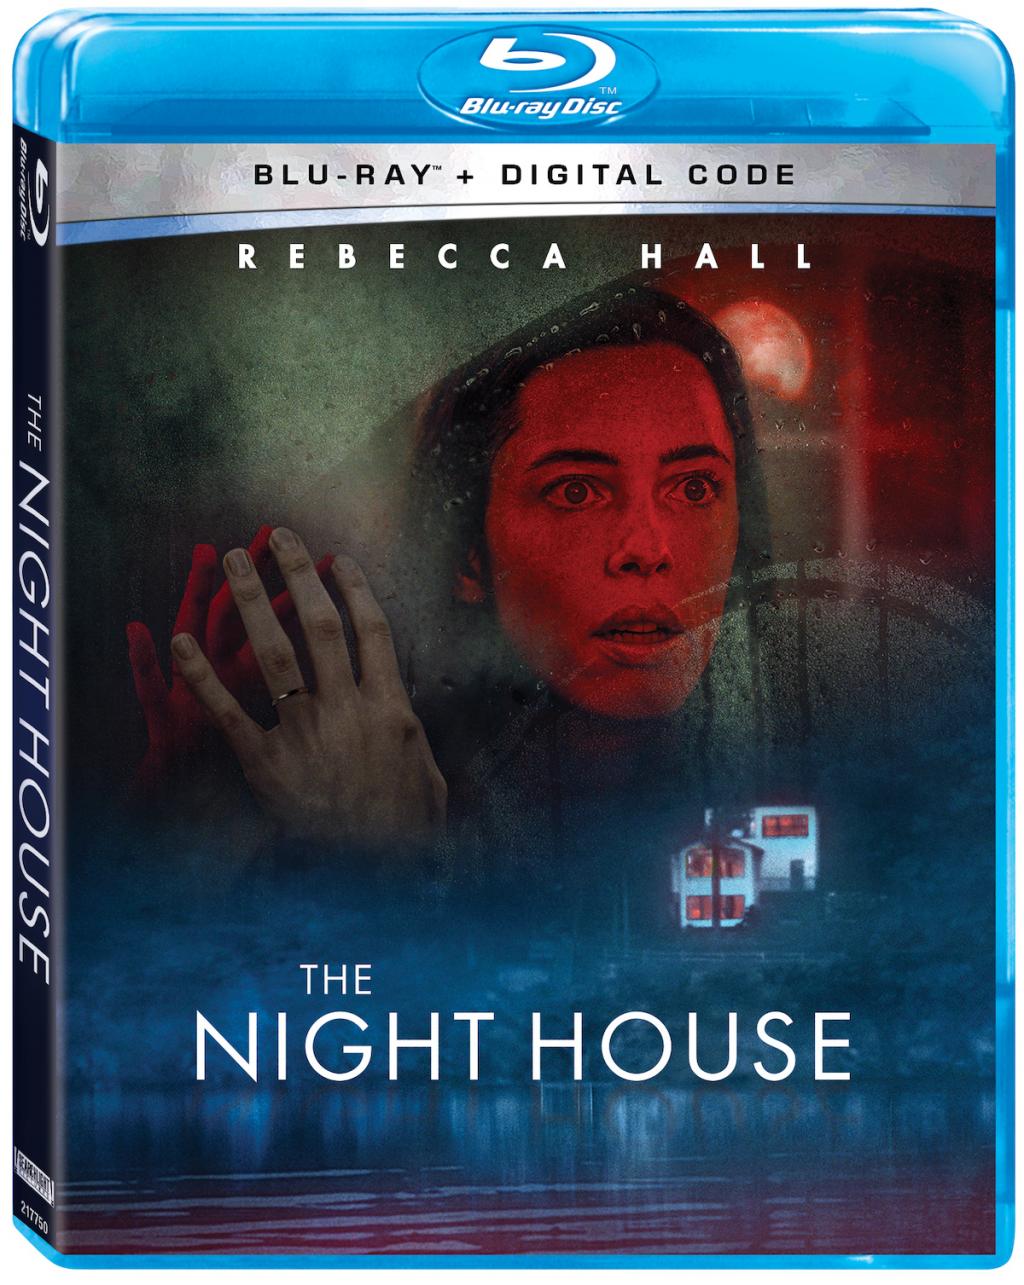 the-night-house-digital-blu-ray-and-dvd-TheNightHouse_6.75_BD_EMBED_US_1_2_rgb.jpg